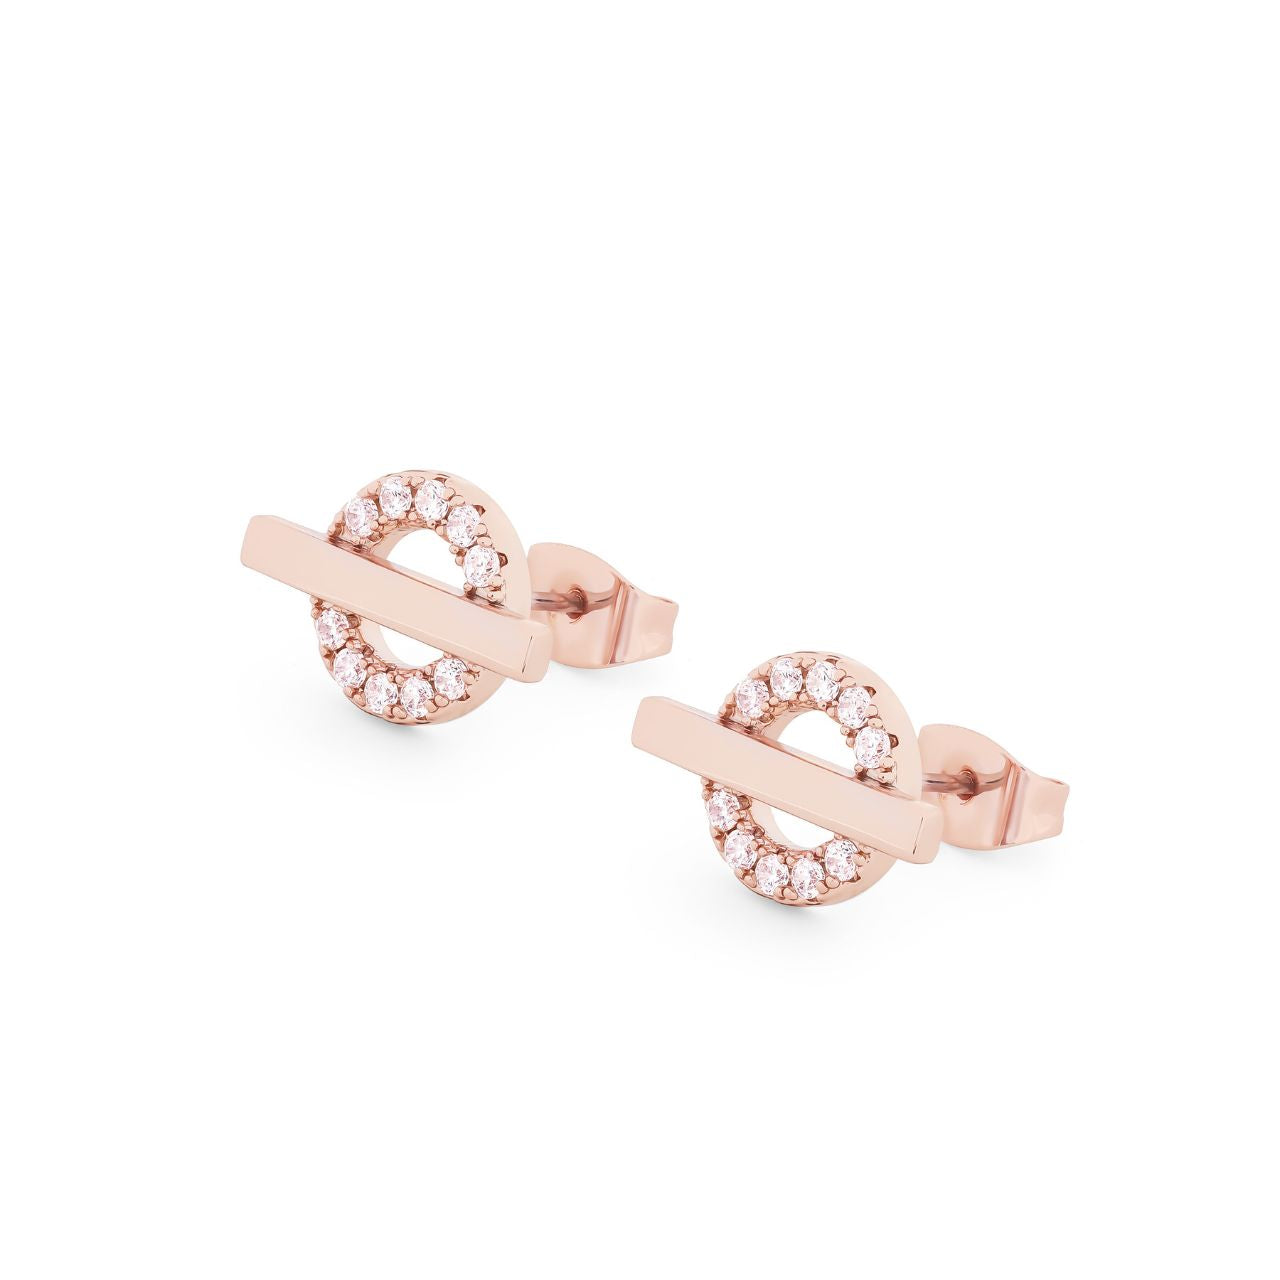 T-Bar Stud Earrings Rose Gold Circle CZ by Tipperary  These stylish T-Bar stud earrings are made of rose gold and feature a Circle CZ for a fashionable, eye-catching look. The luxury craftsmanship of Tipperary's jewellery makes these earrings strong and durable for everyday wear.